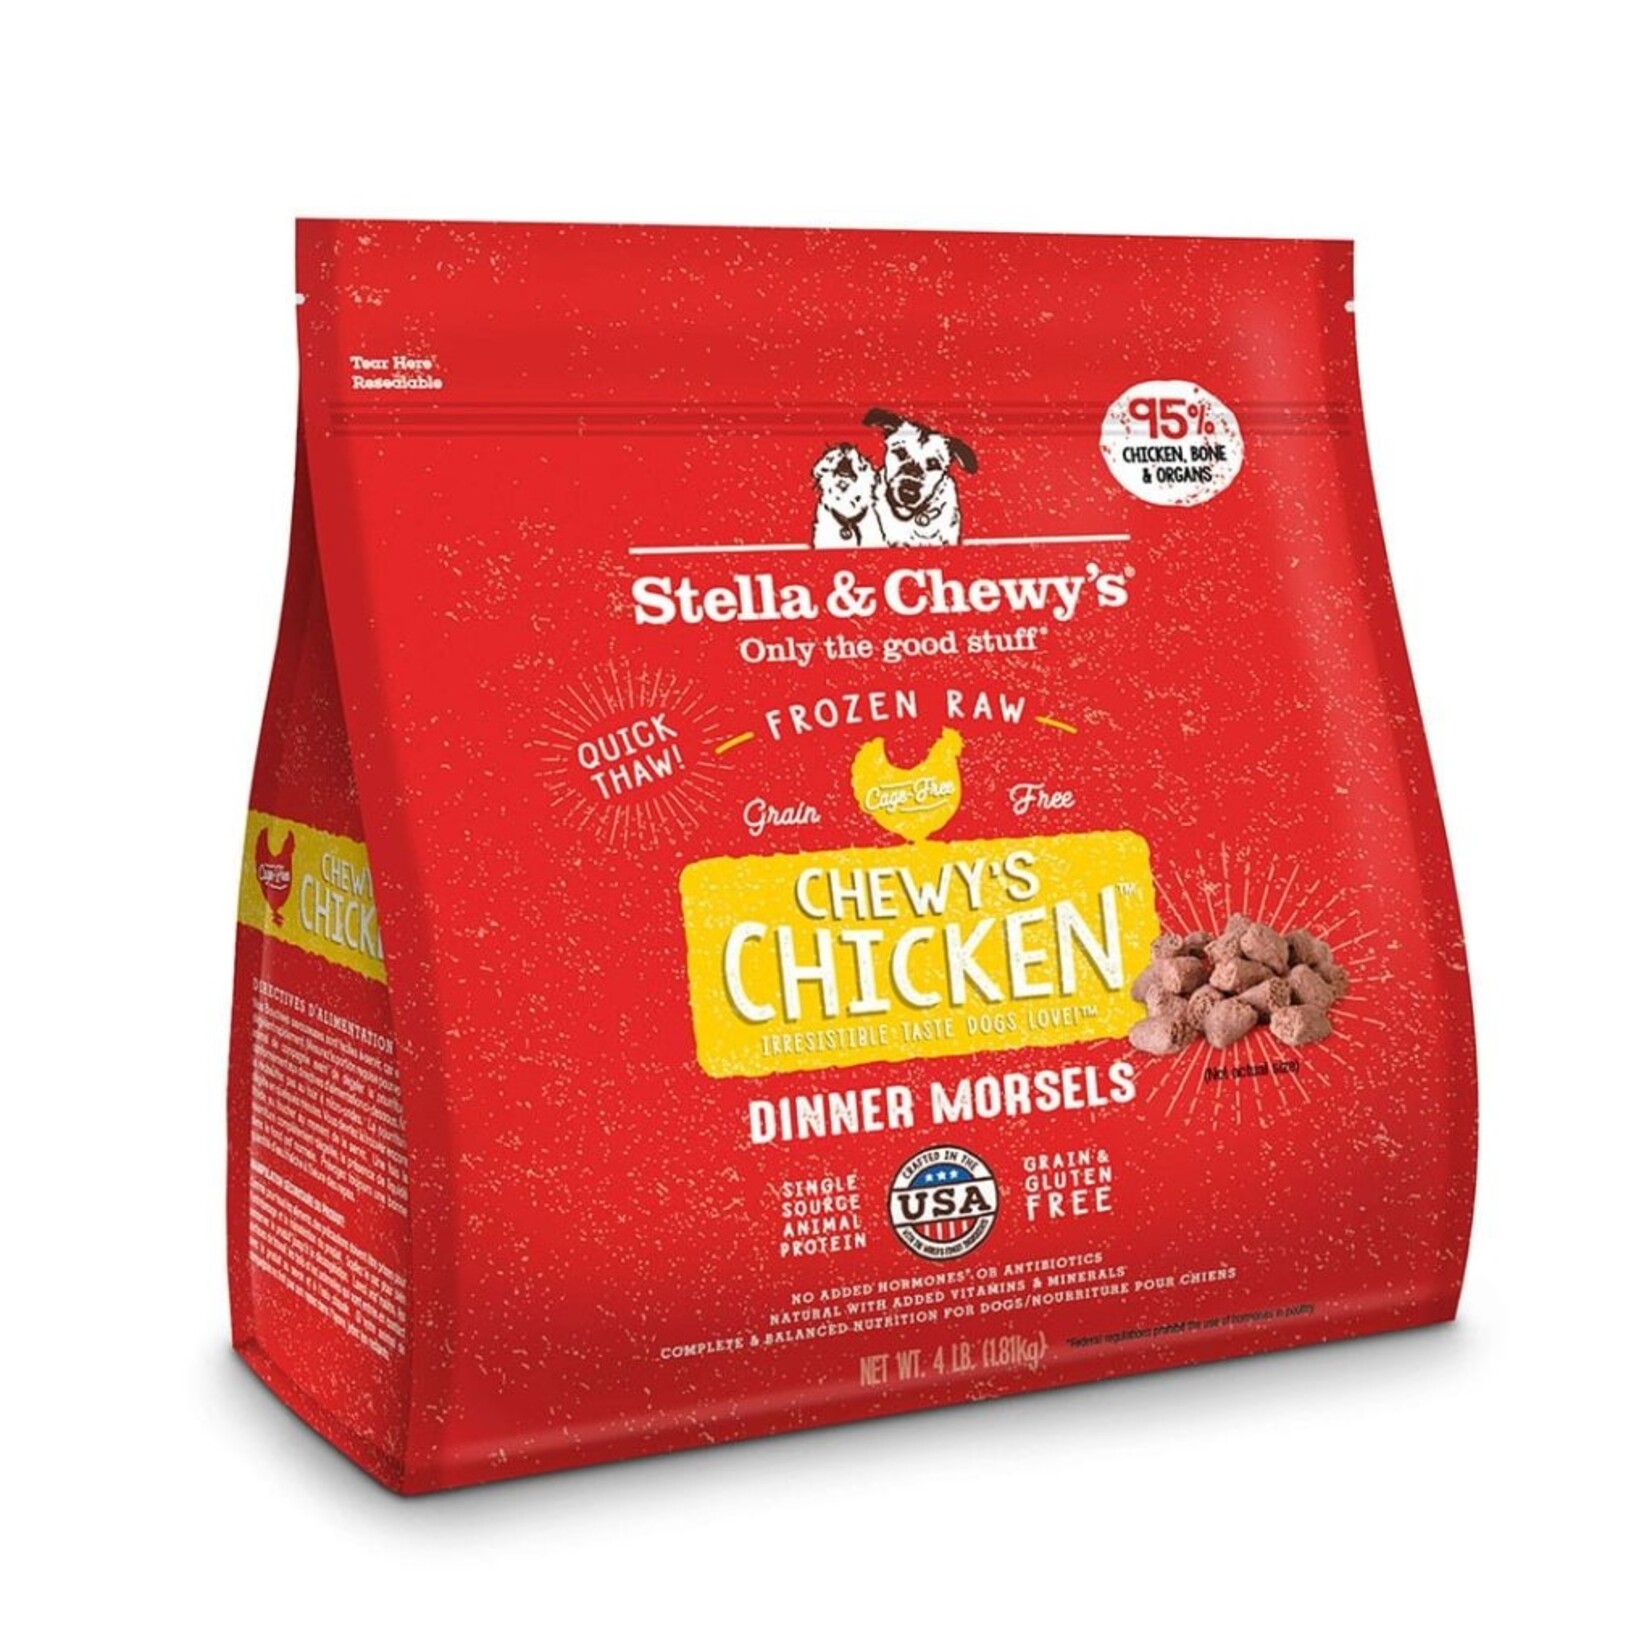 Stella & Chewy's Chewy's Chicken - Raw Frozen - Patties or Morsels - Stella & Chewy's